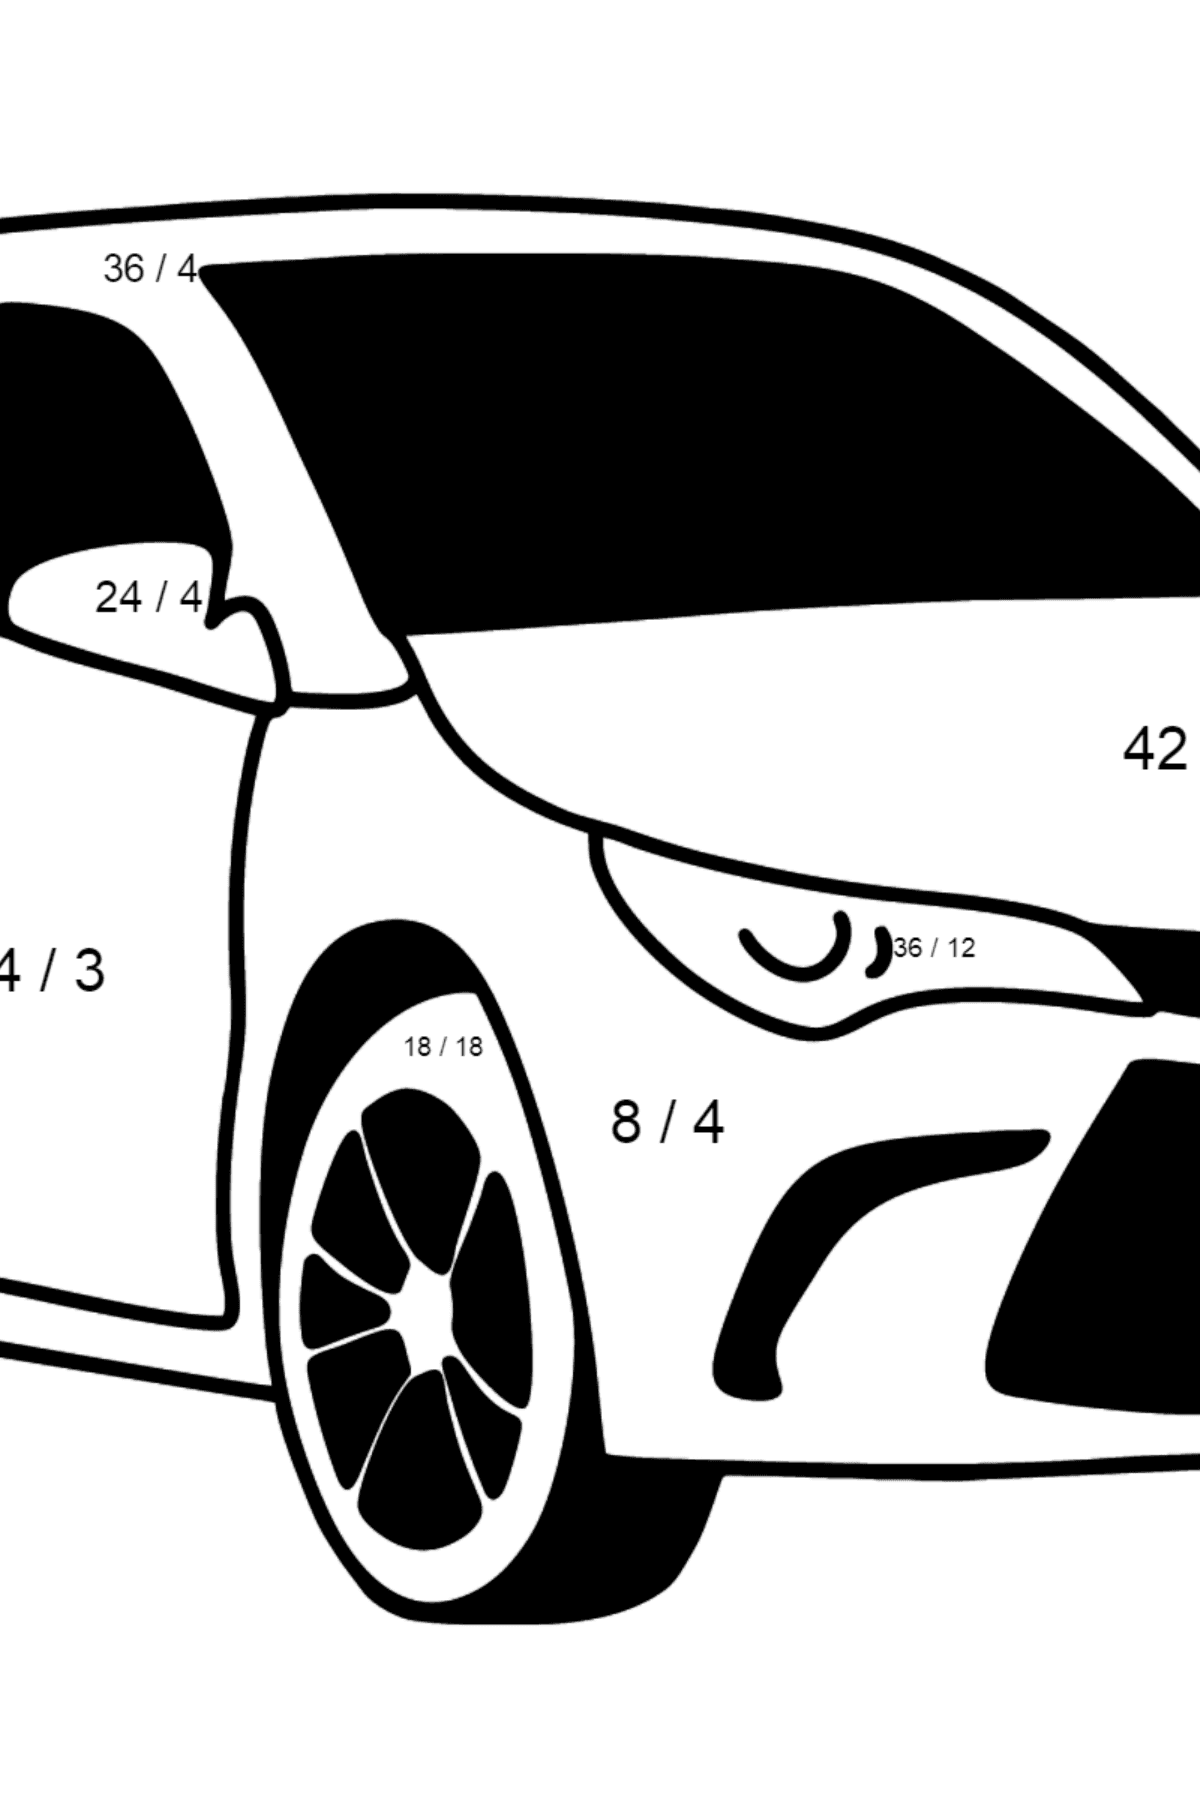 Toyota Camry coloring page - Math Coloring - Division for Kids